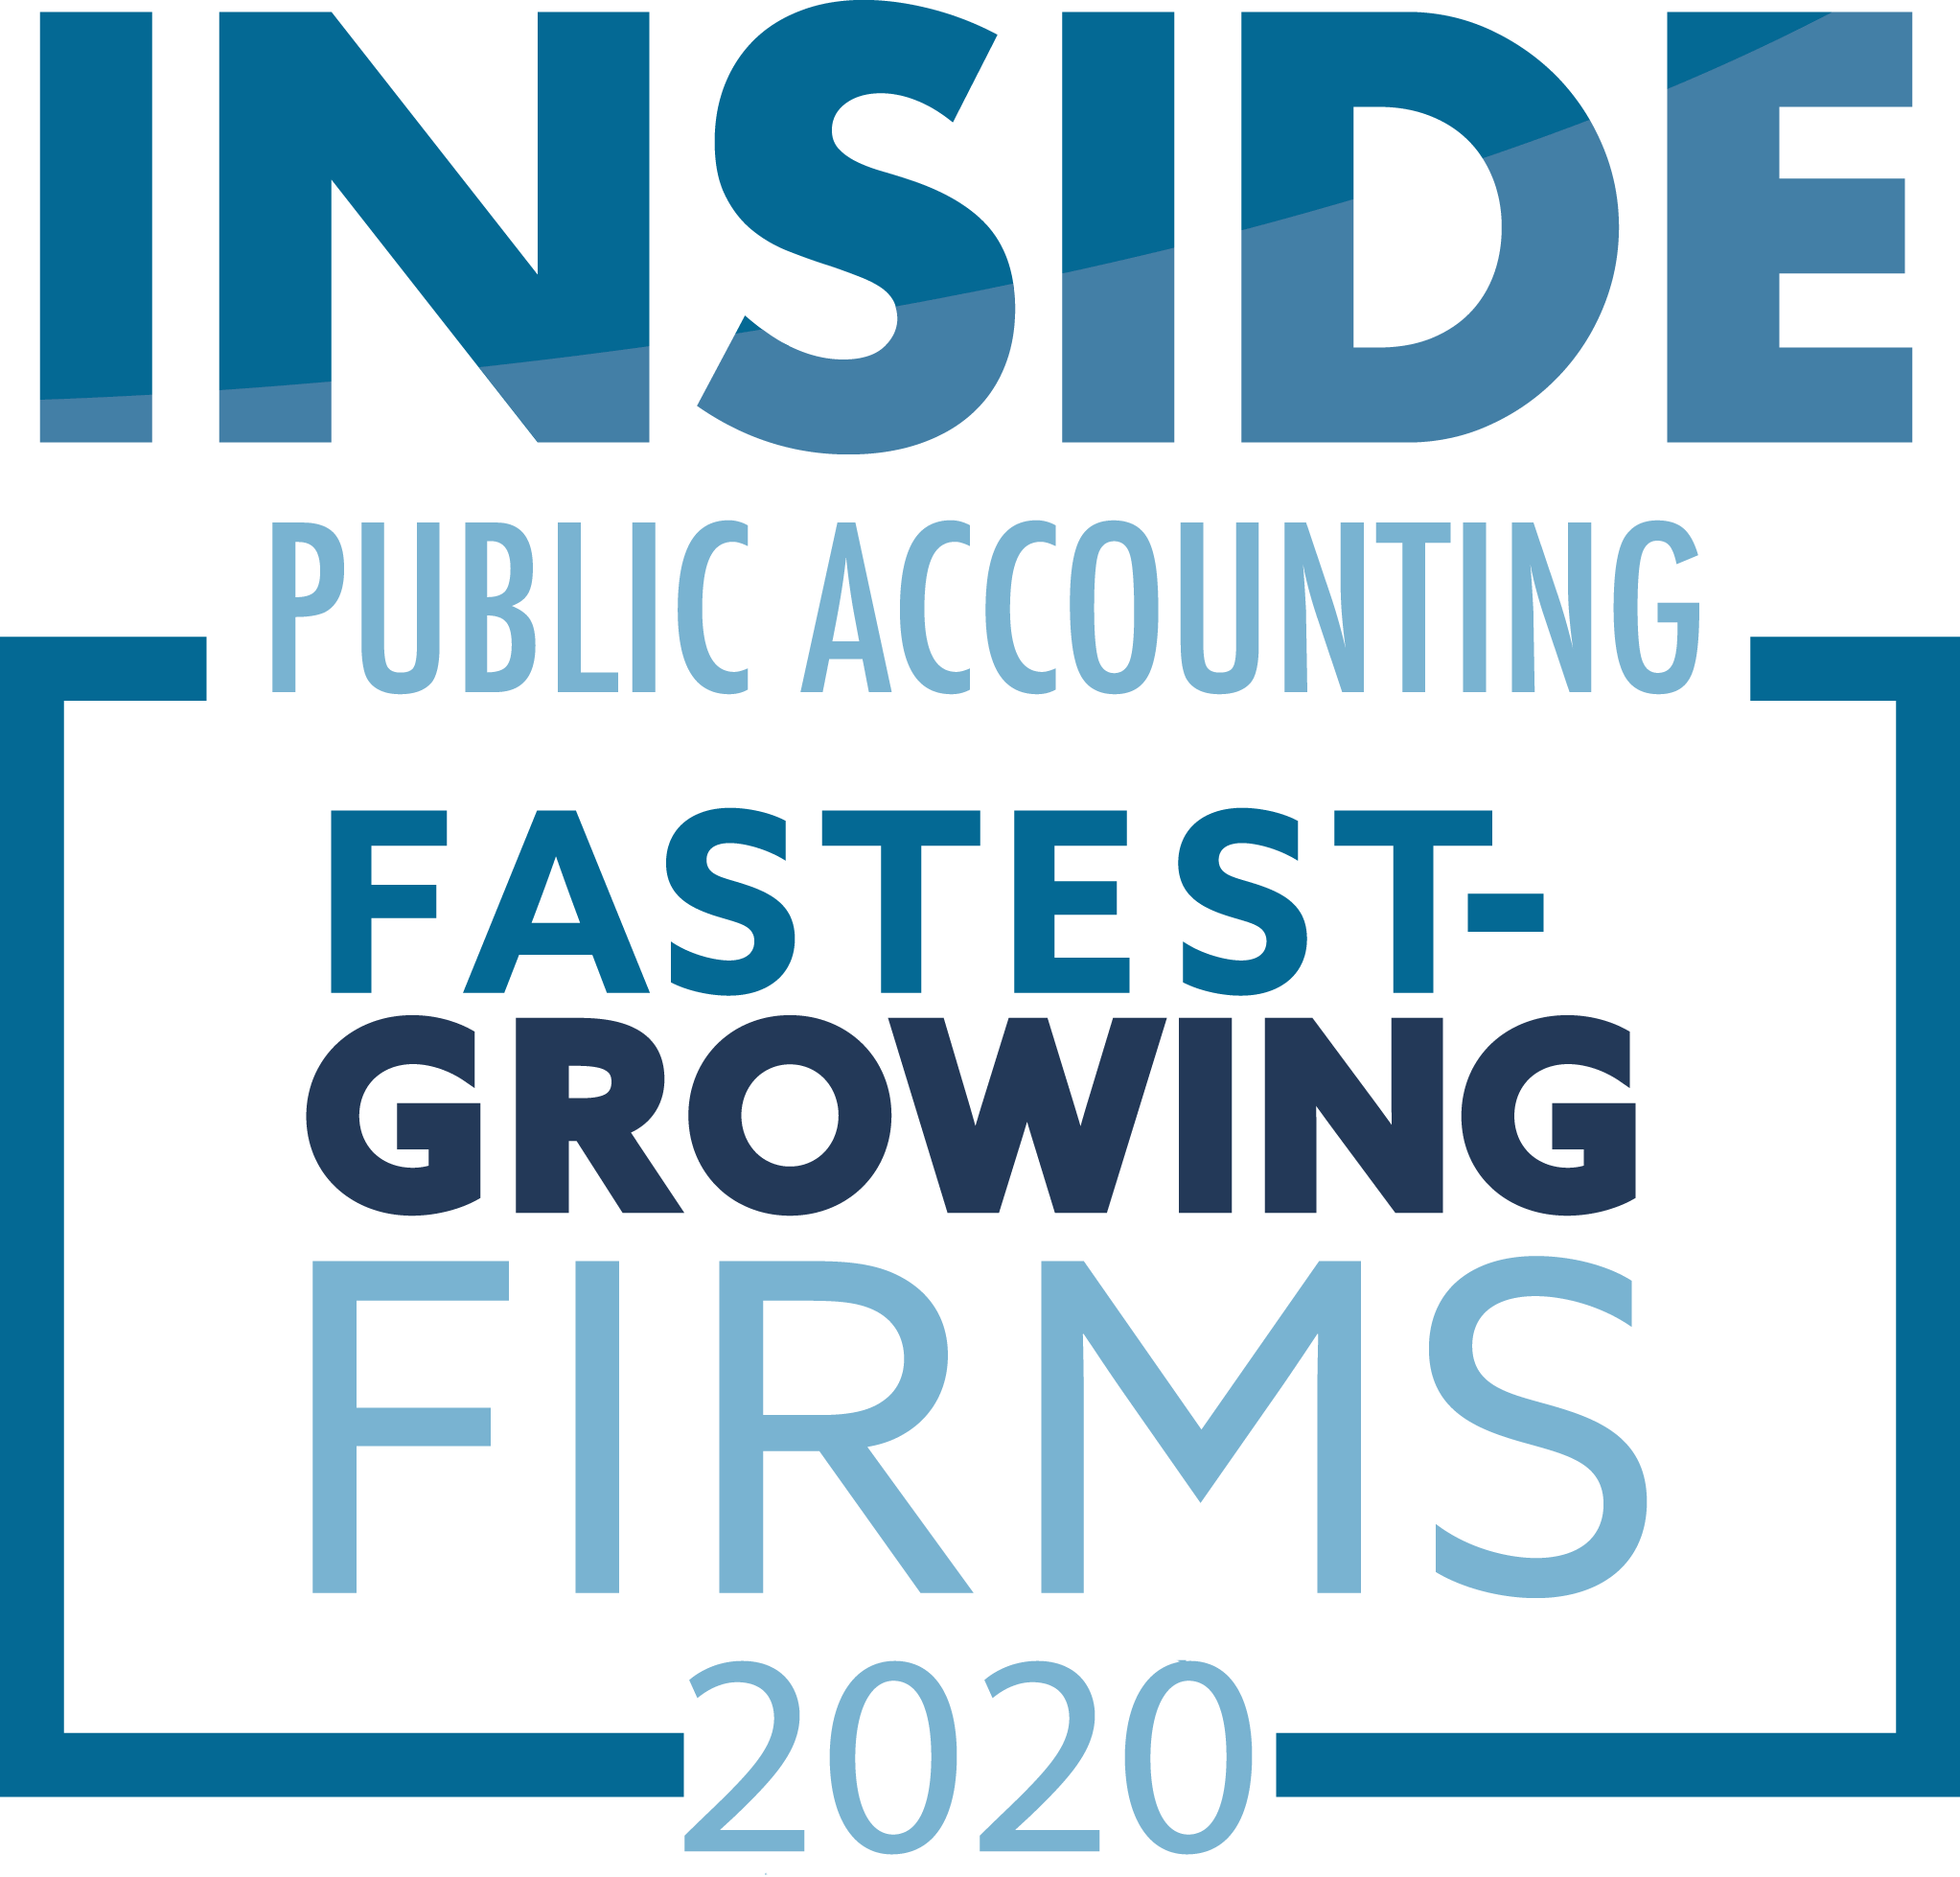 IPA fastest growing firms 2020 - Richey May was recognized for the 6th year in a row.